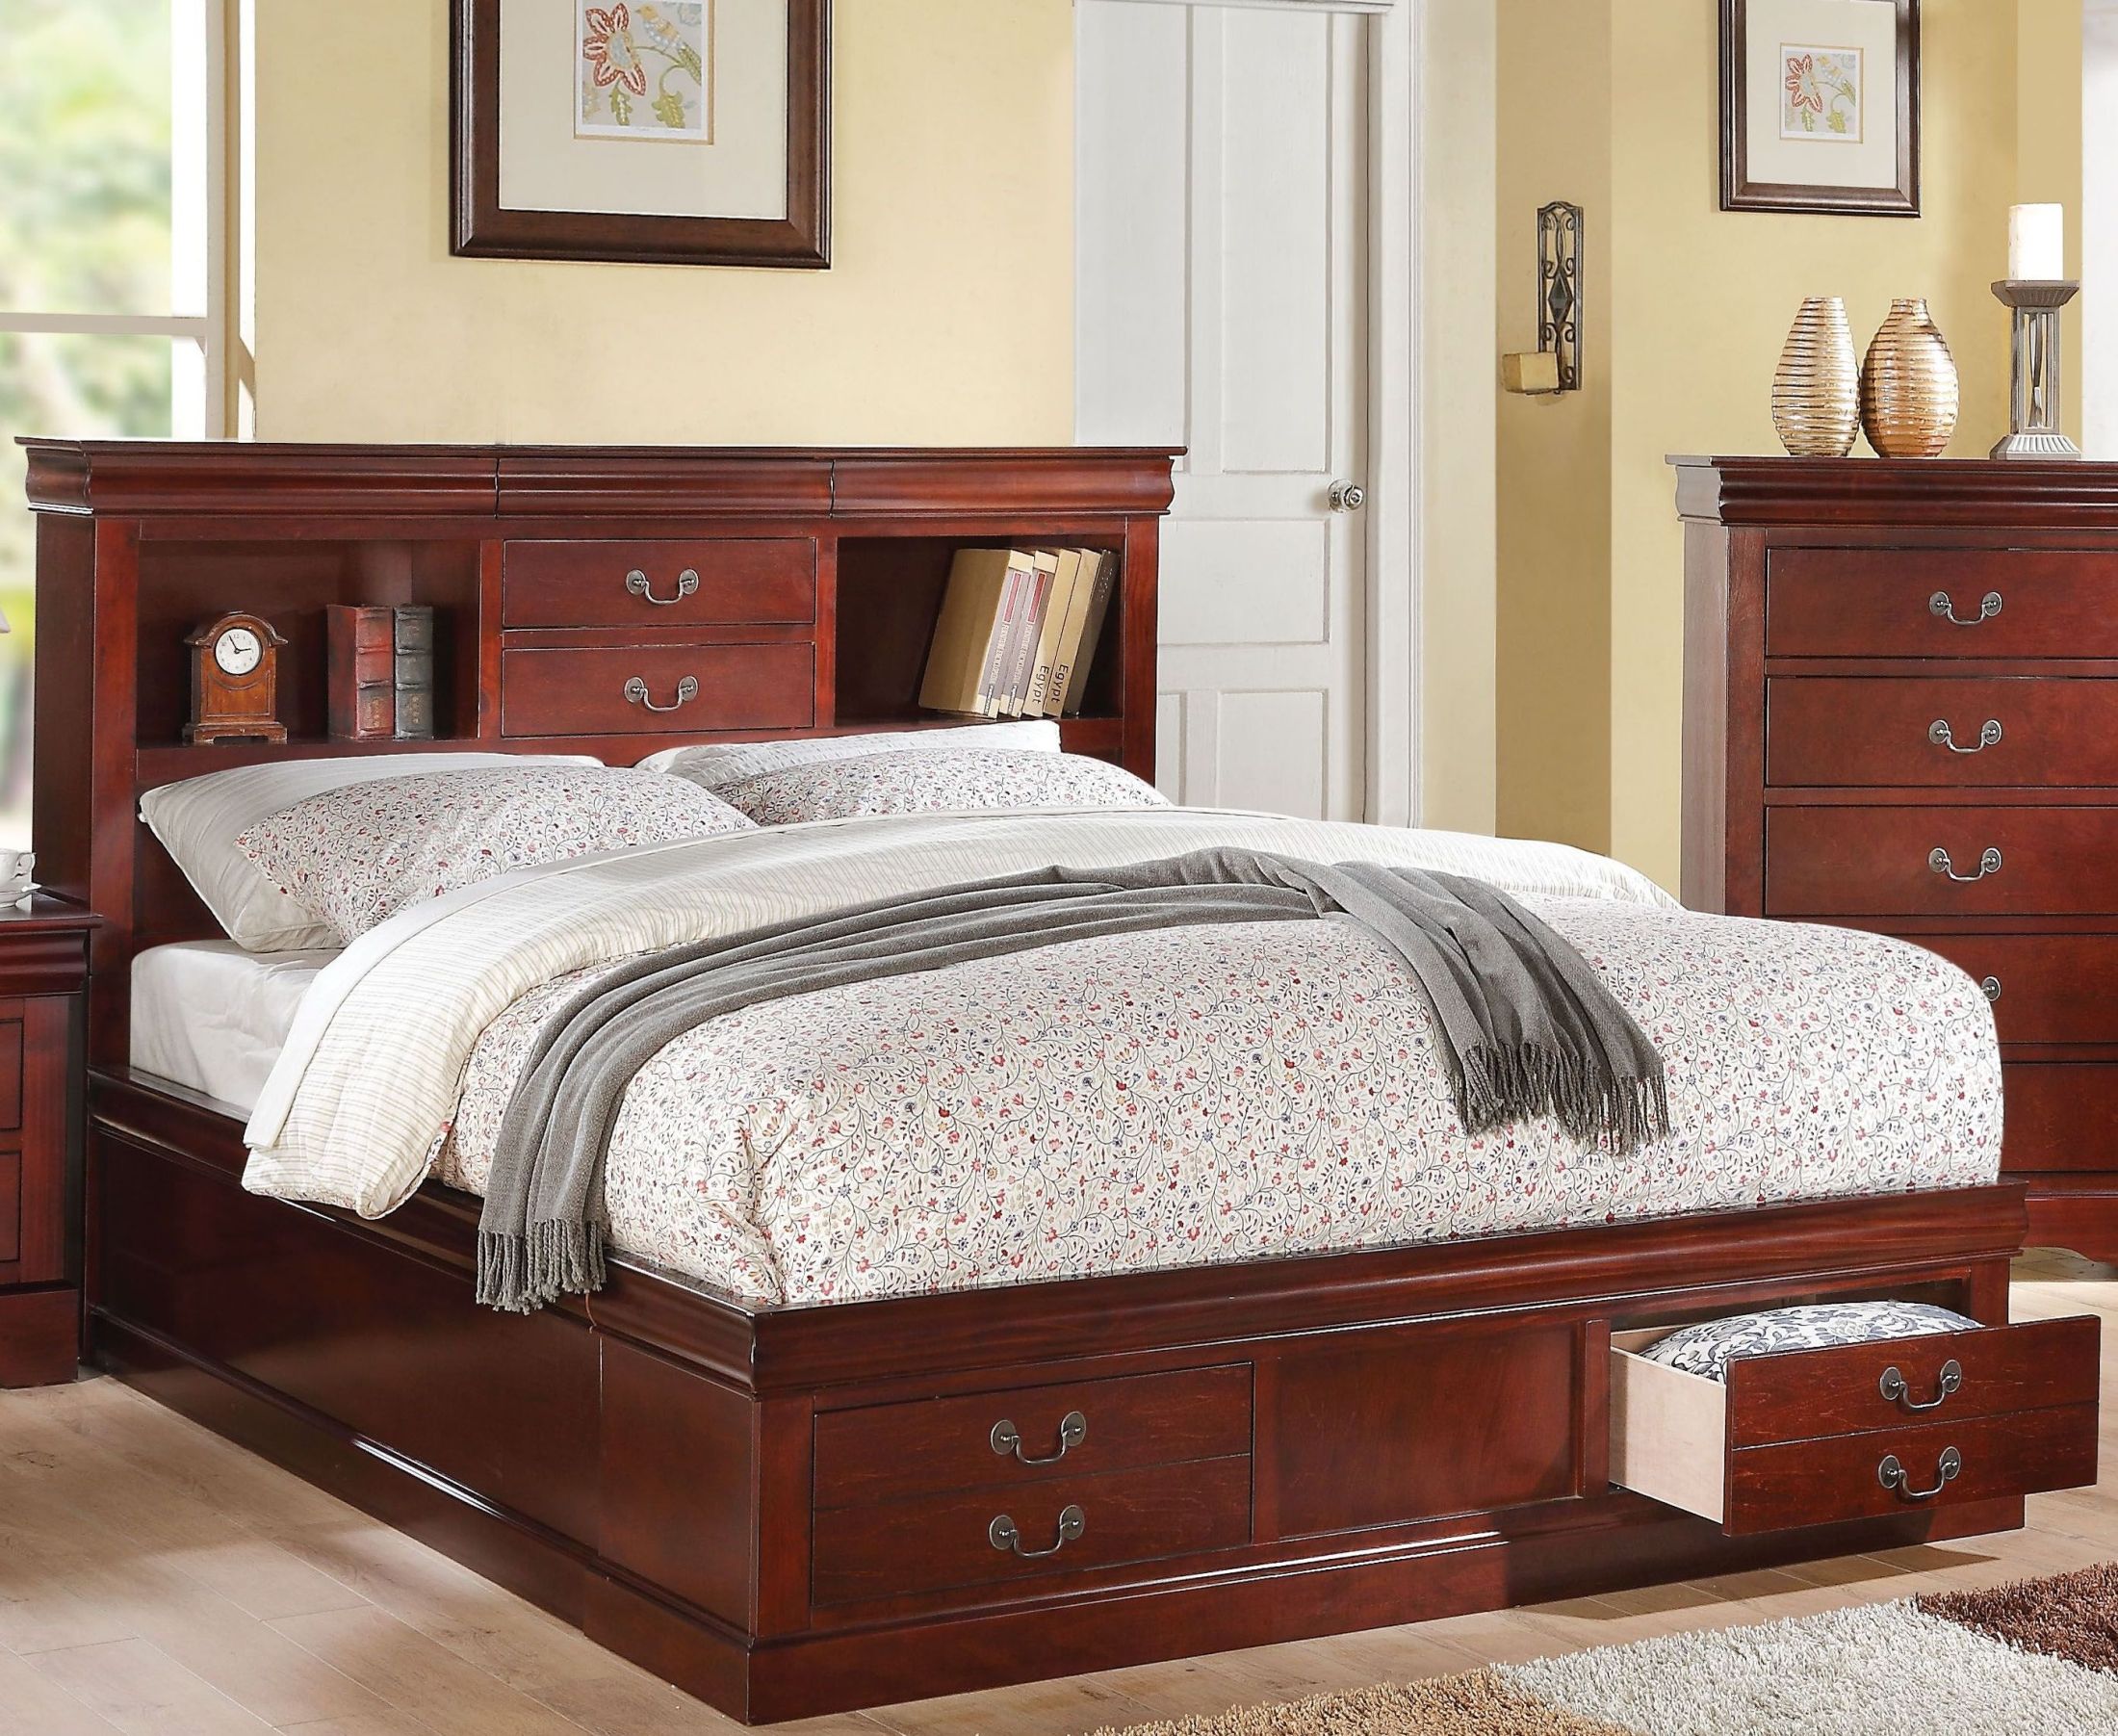 ACME Louis Philippe Iii Cherry Cal. King Bookcase Storage Bed - Louis Philippe Iii Collection: 7 ...